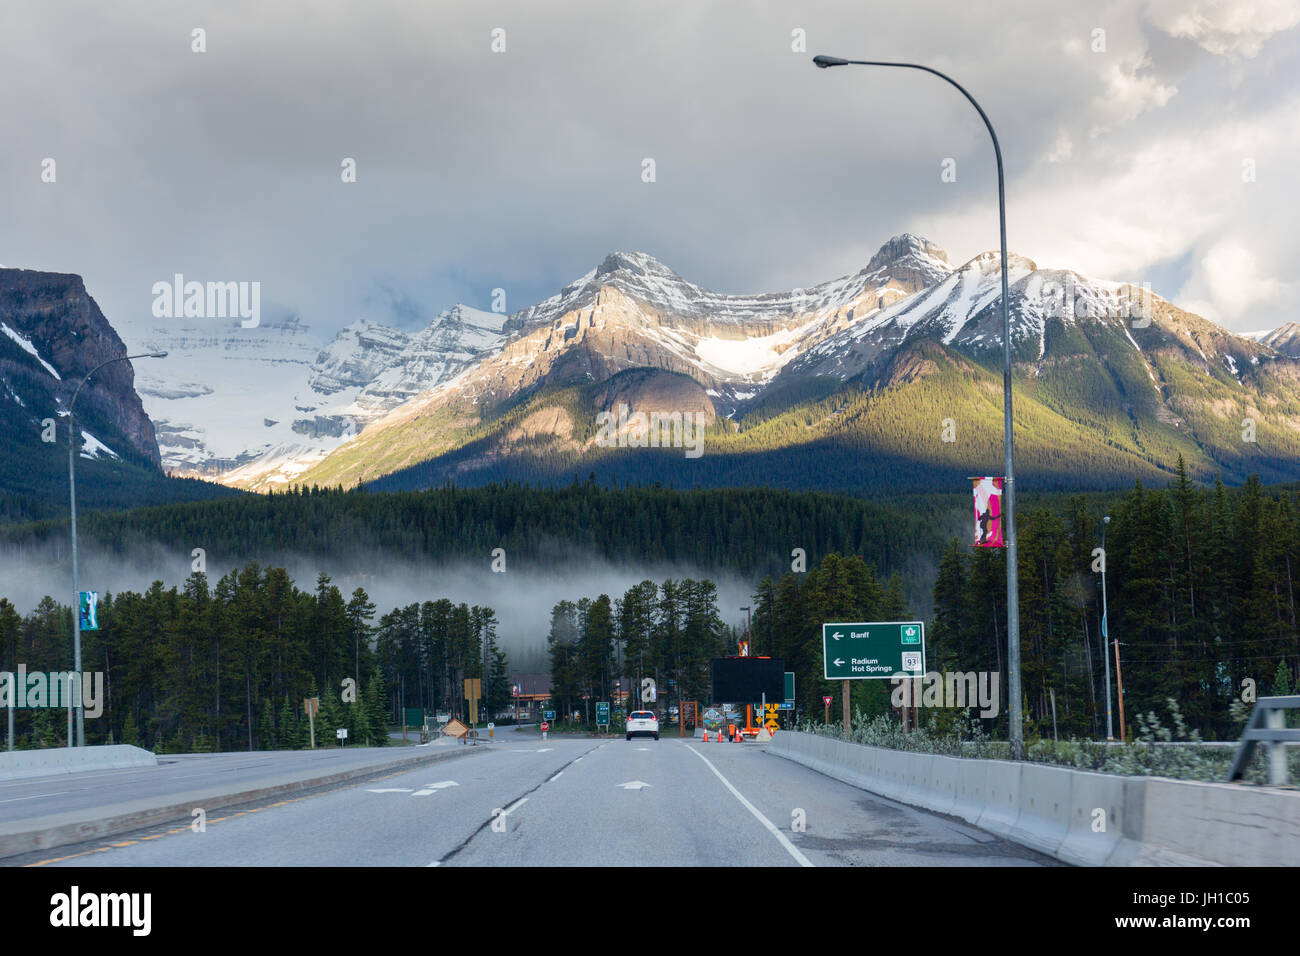 View on the town of Lake Louise just after sunrise, as seen from the viaduct over Highway 1. Lake Louise, Banff National Park, Alberta, Canada Stock Photo